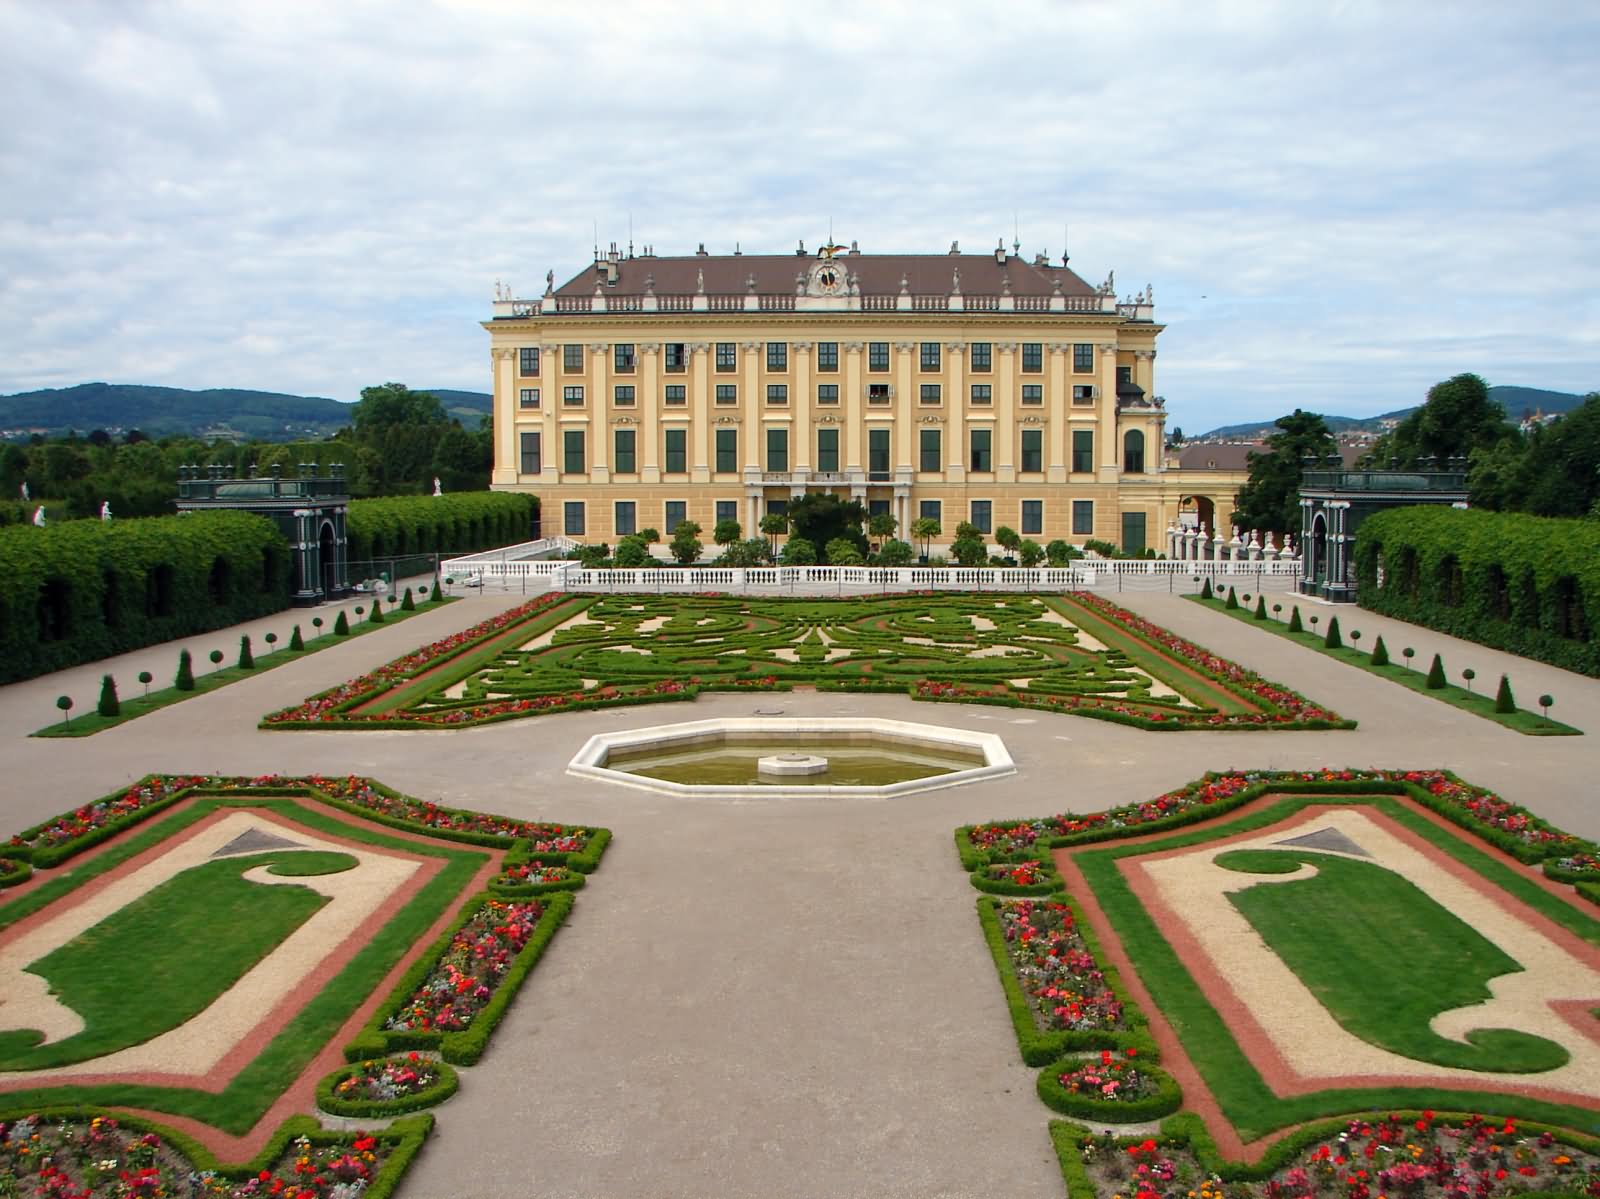 Amazing View Of The Schonbrunn Palace In Vienna, Austria